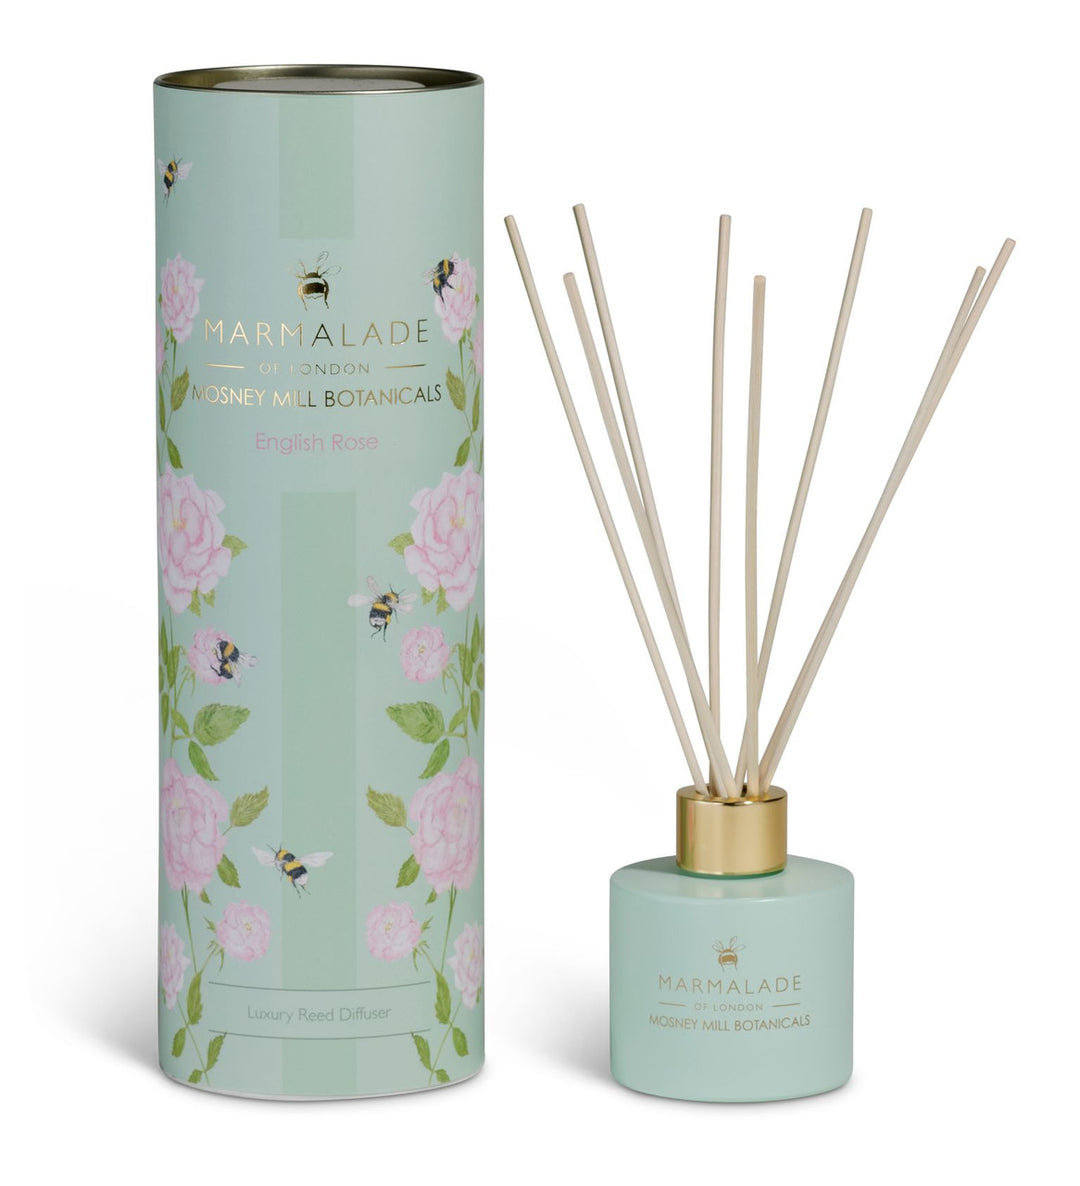 English Rose glass reed diffuser from Mosney Mill. Made by Marmalade of London.